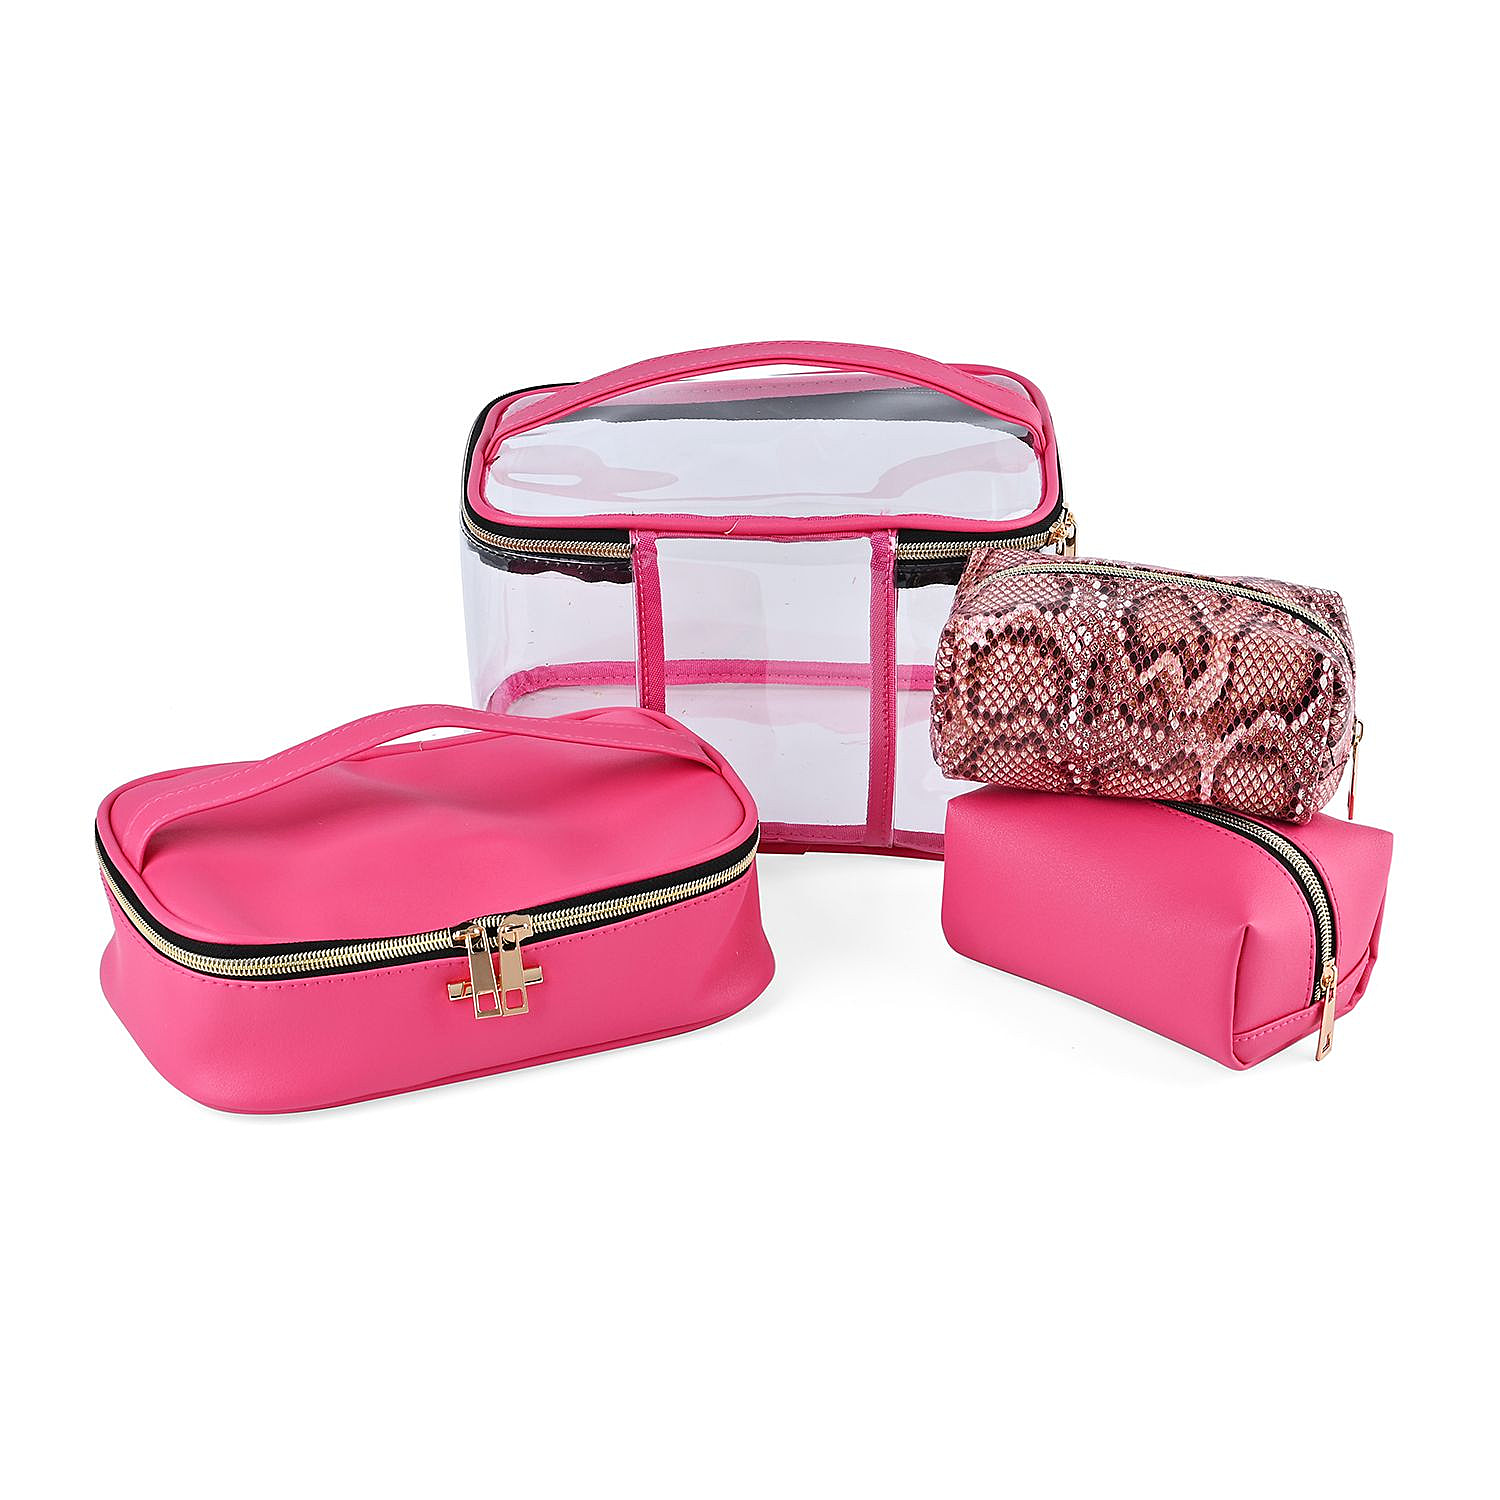 Set of 4 Leatherette Cosmetic Bag (Size L,M,S) - Rose Pink & Snakeskin